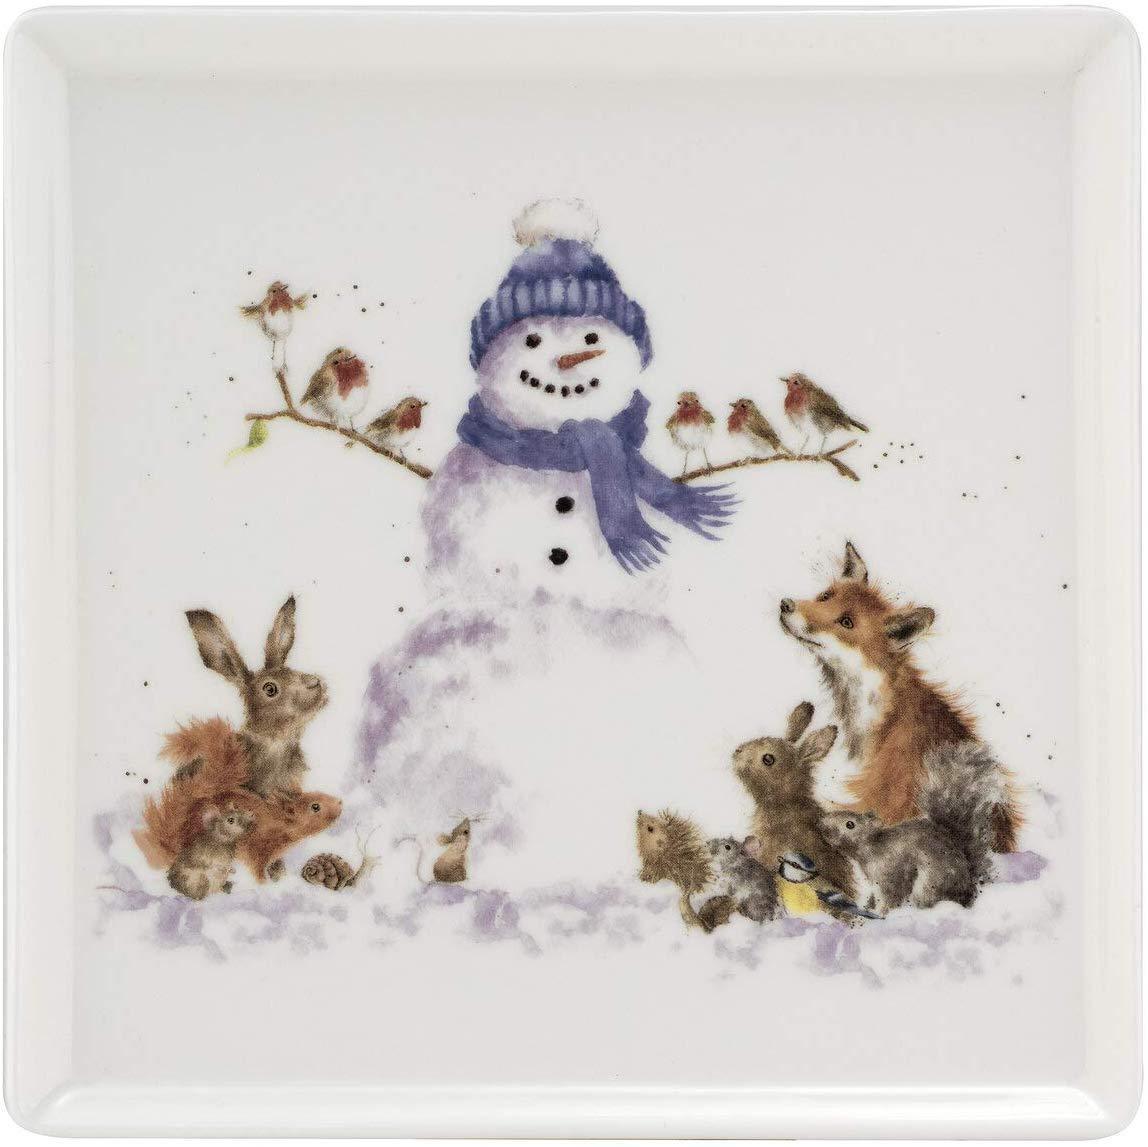 Wrendale Designs Plates, Christmas Decorations Square Ceramic Plate with Snowman Design